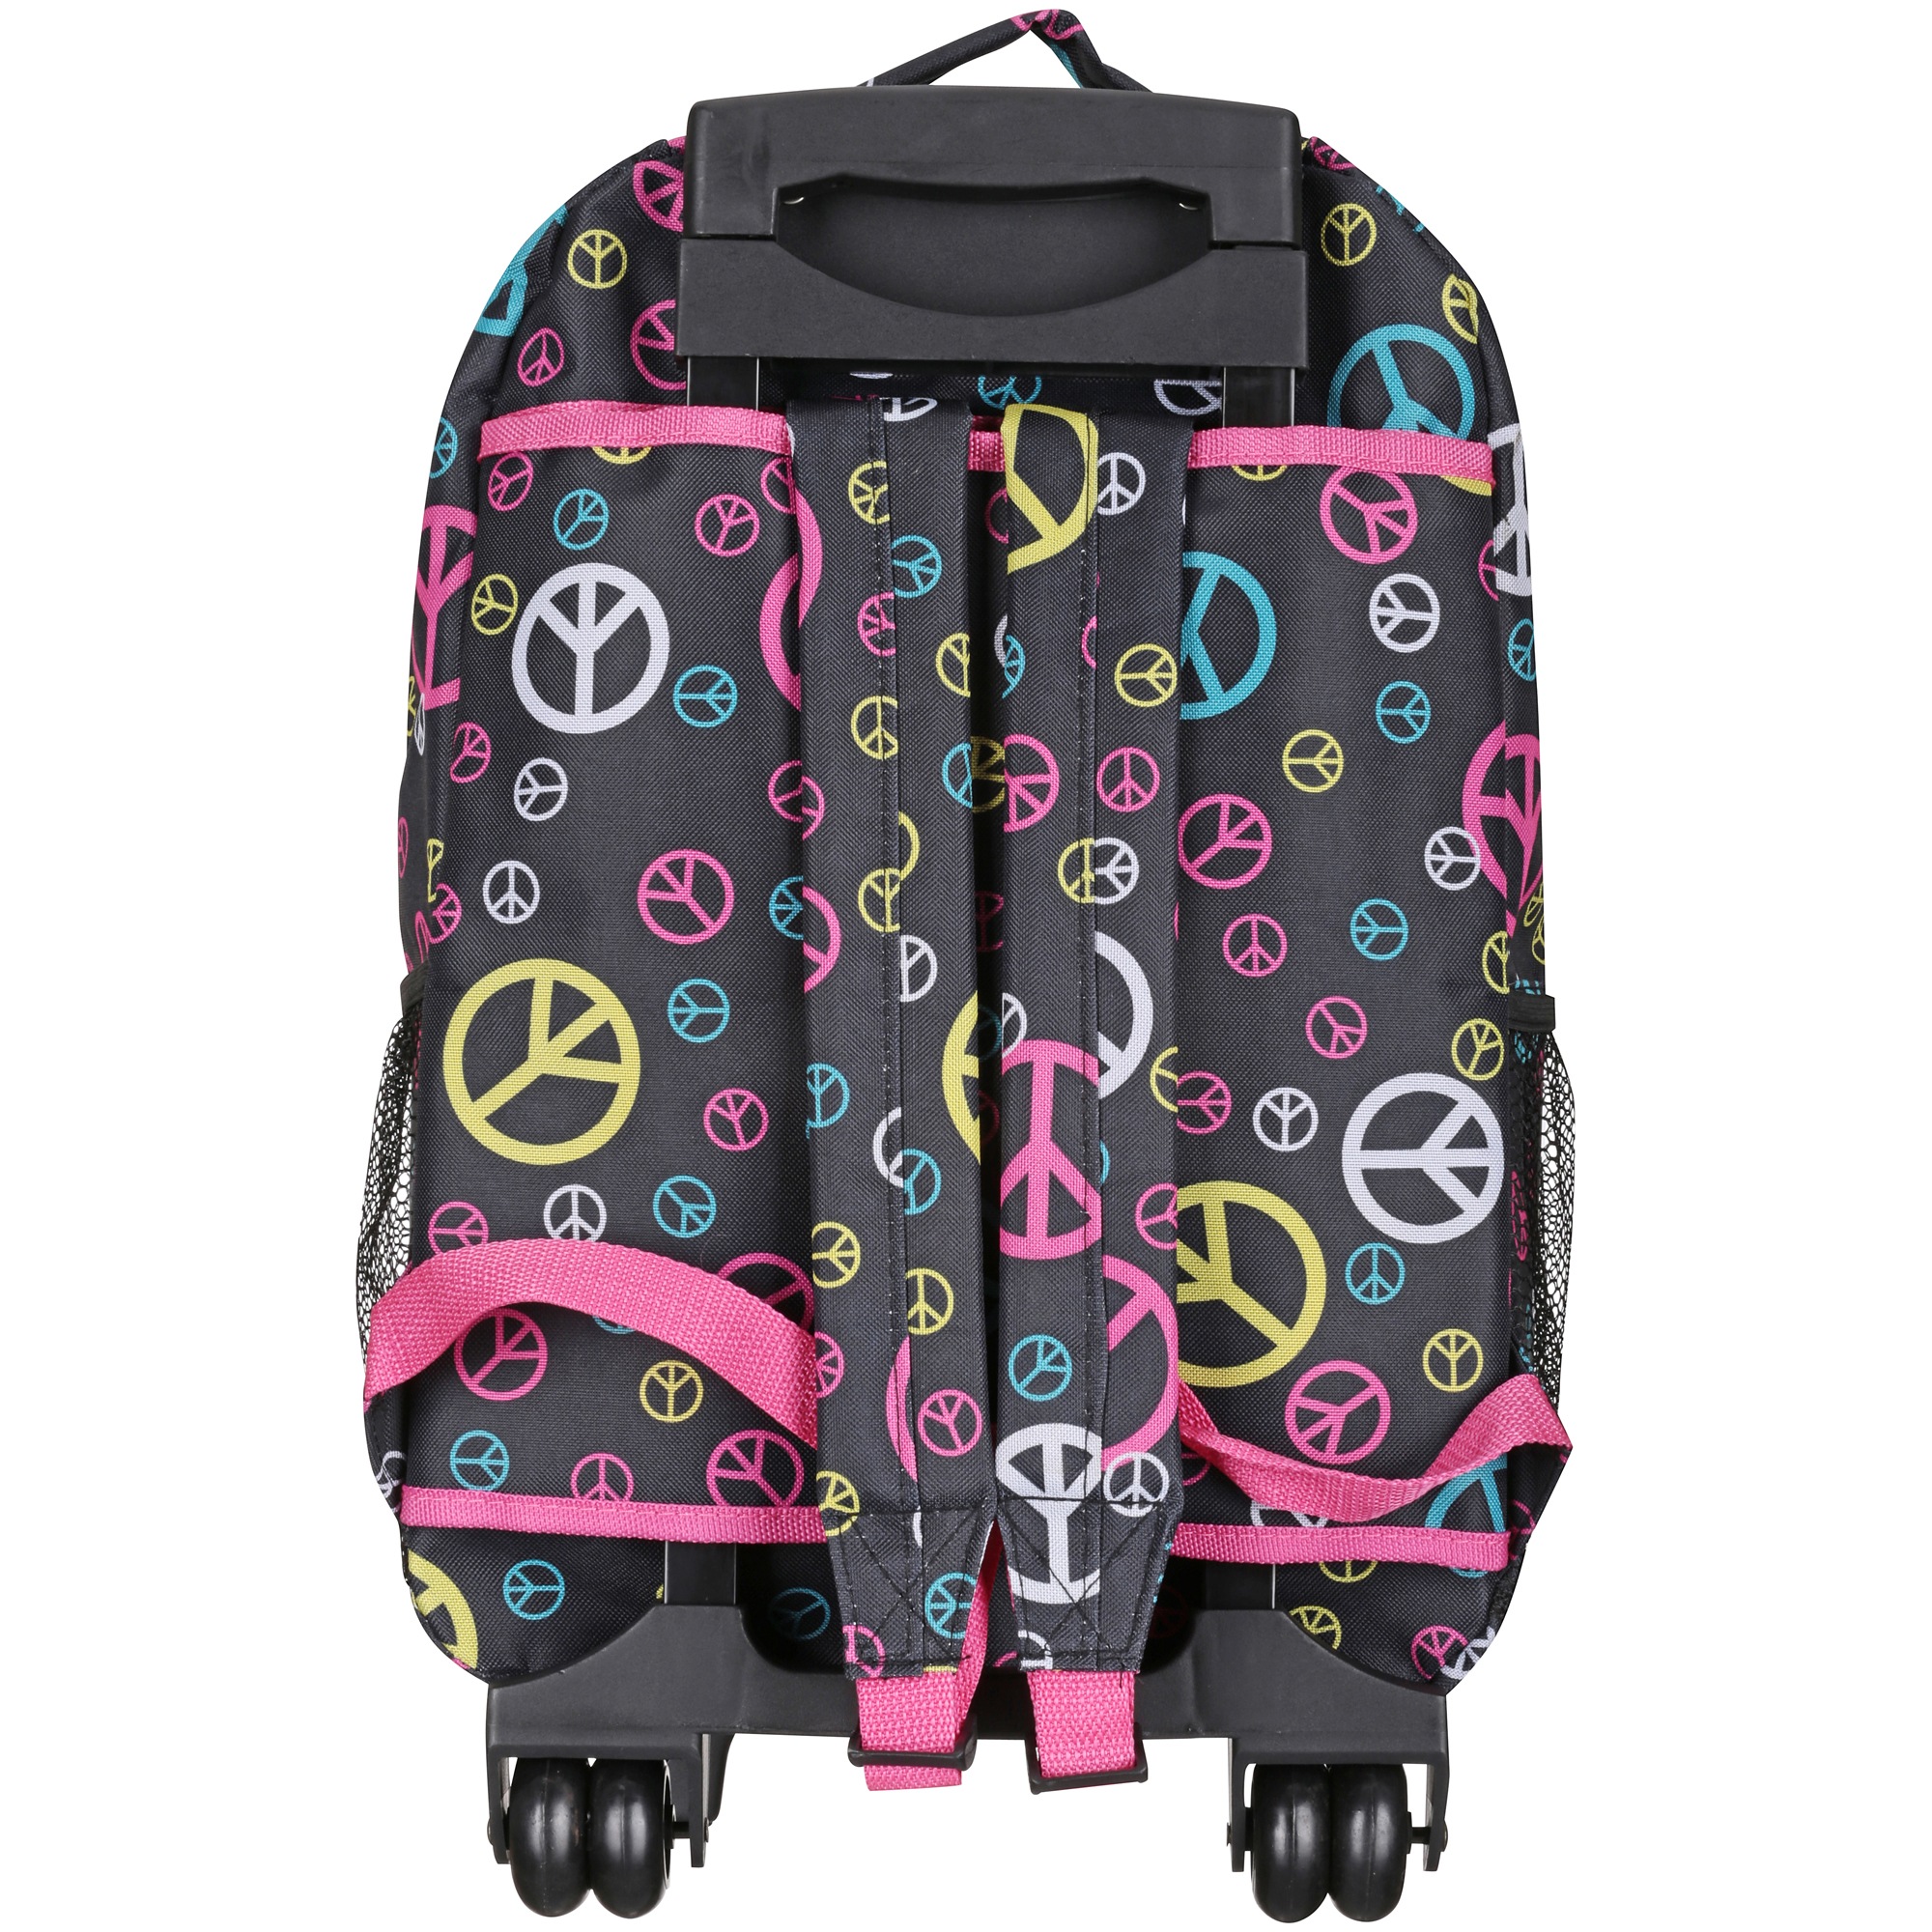 Rockland Unisex Luggage 17" Rolling Backpack R01 Peace - image 4 of 6